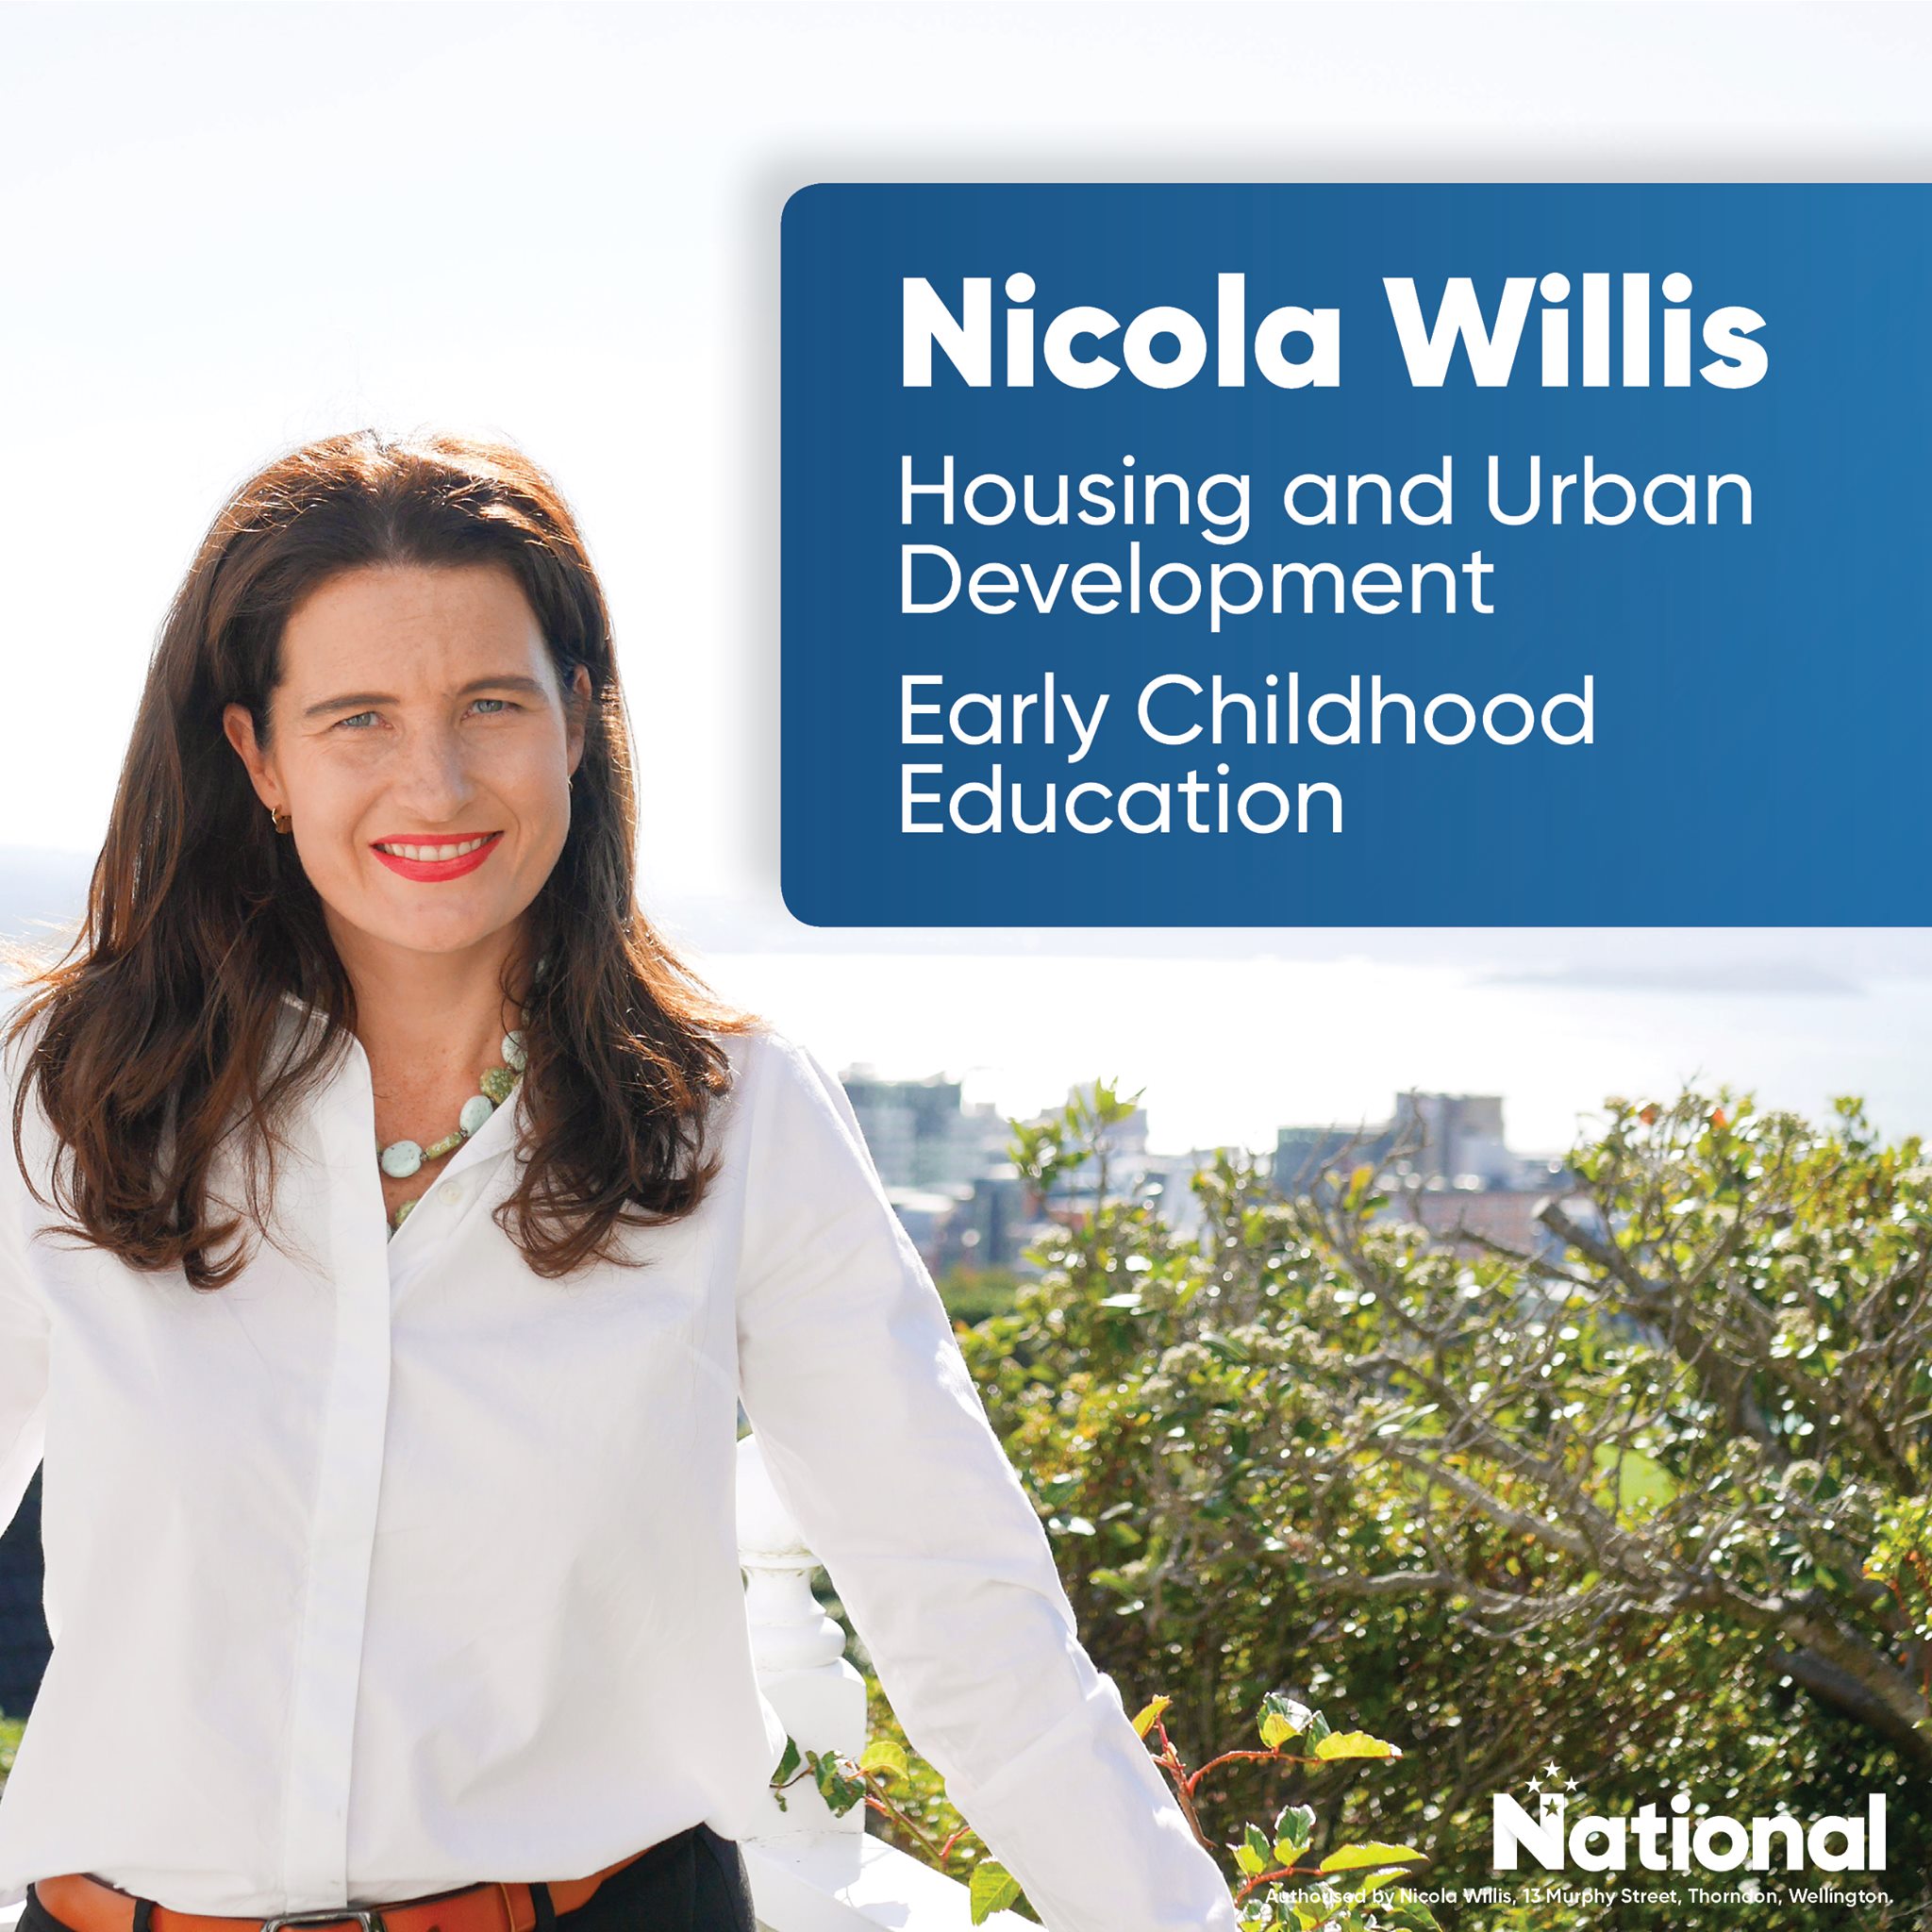 The National Party housing spokesperson, Nicola Willis, is our Keynote speaker